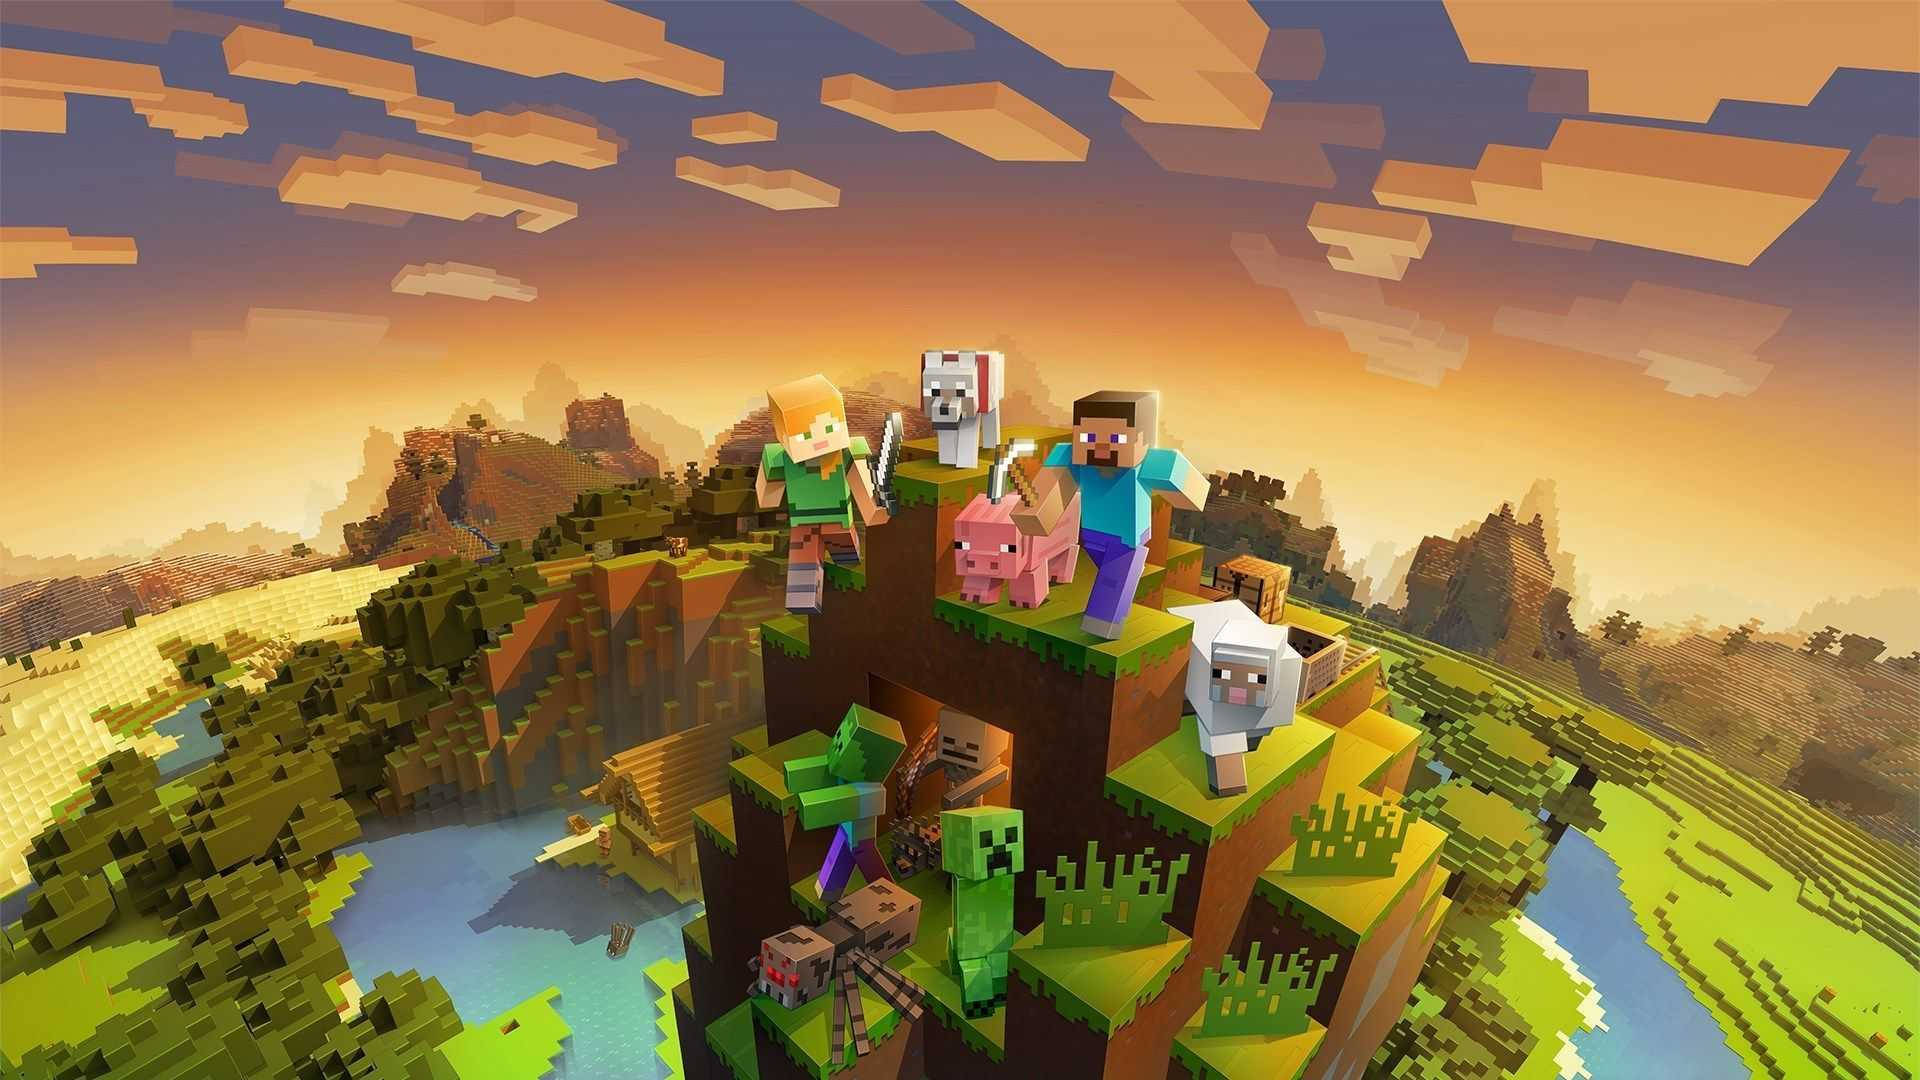 Download Characters On Mountain Minecraft Hd Wallpaper 